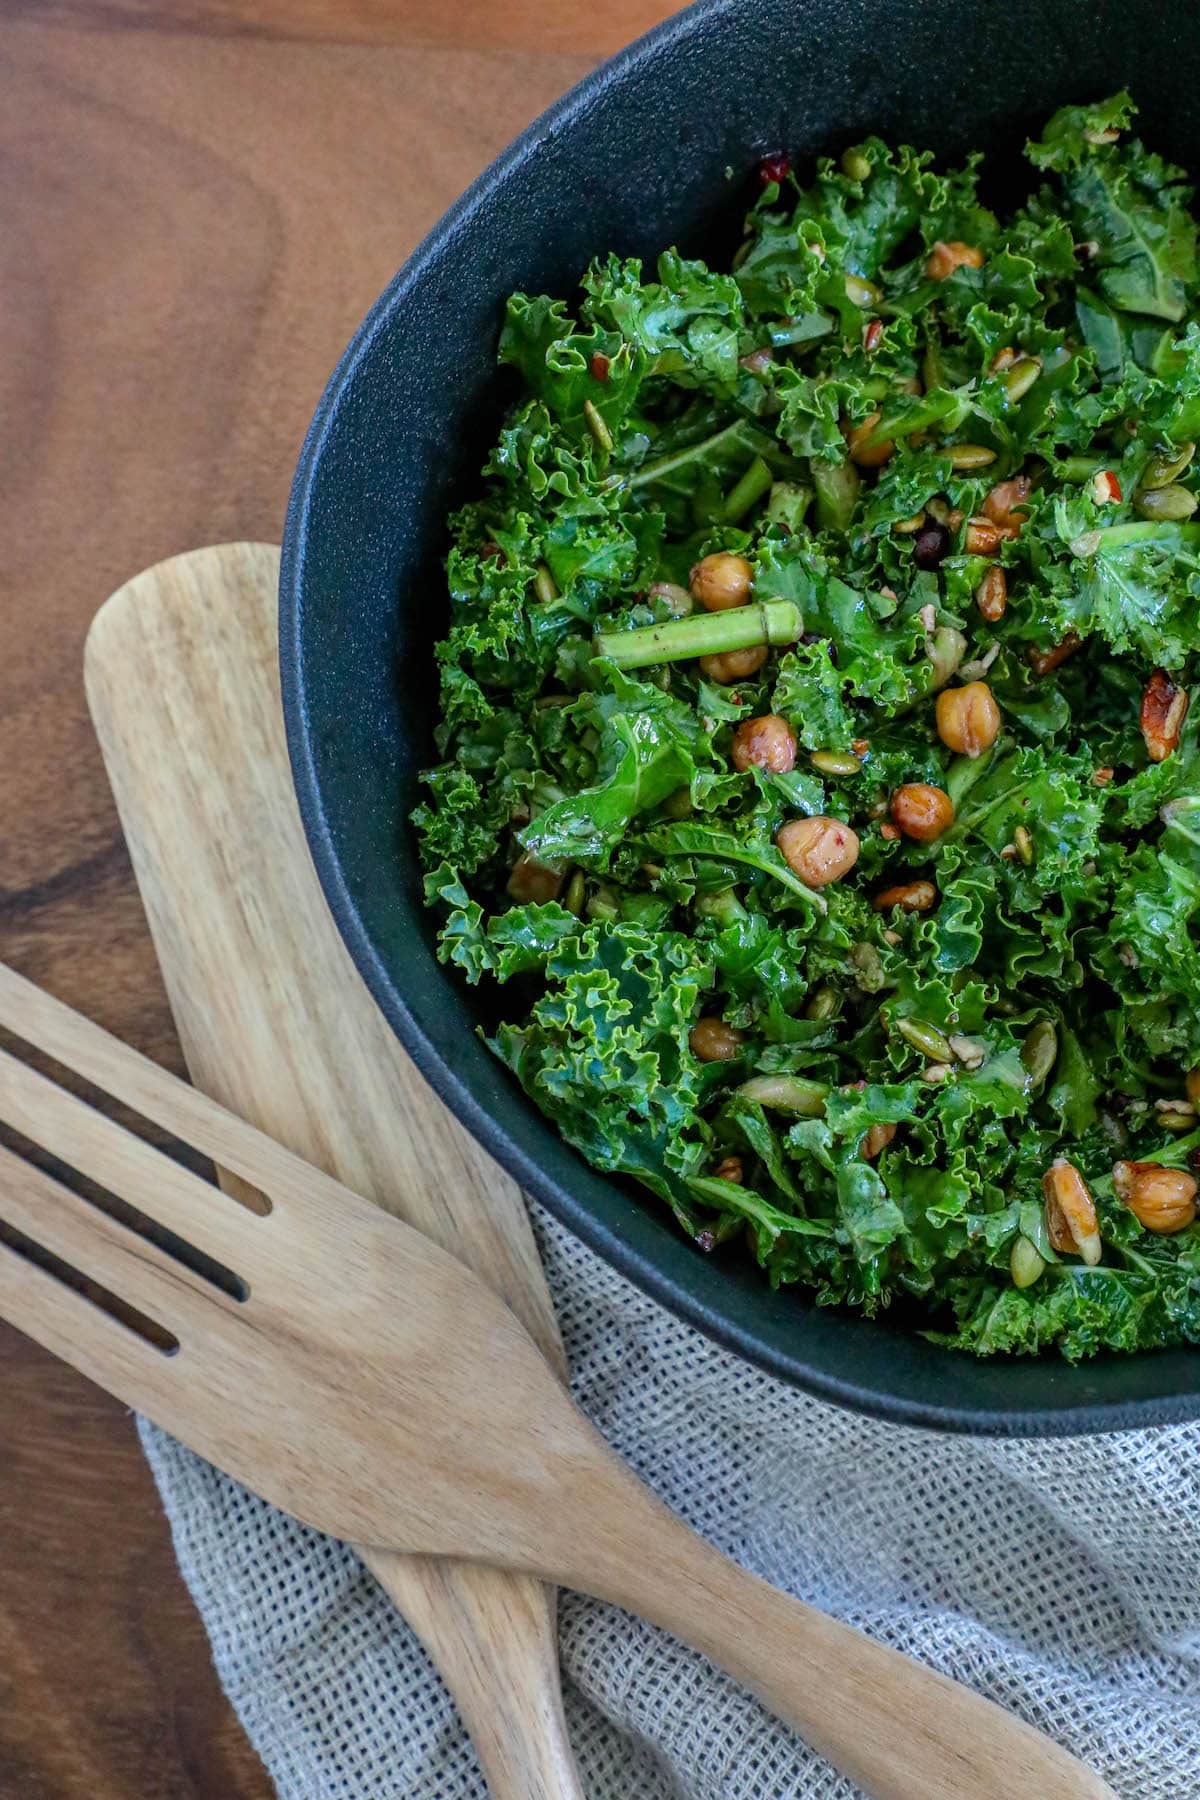 kale salad in a bowl with chickpeas, dried cranberries, pomegranate arils, pepitas, and dressing